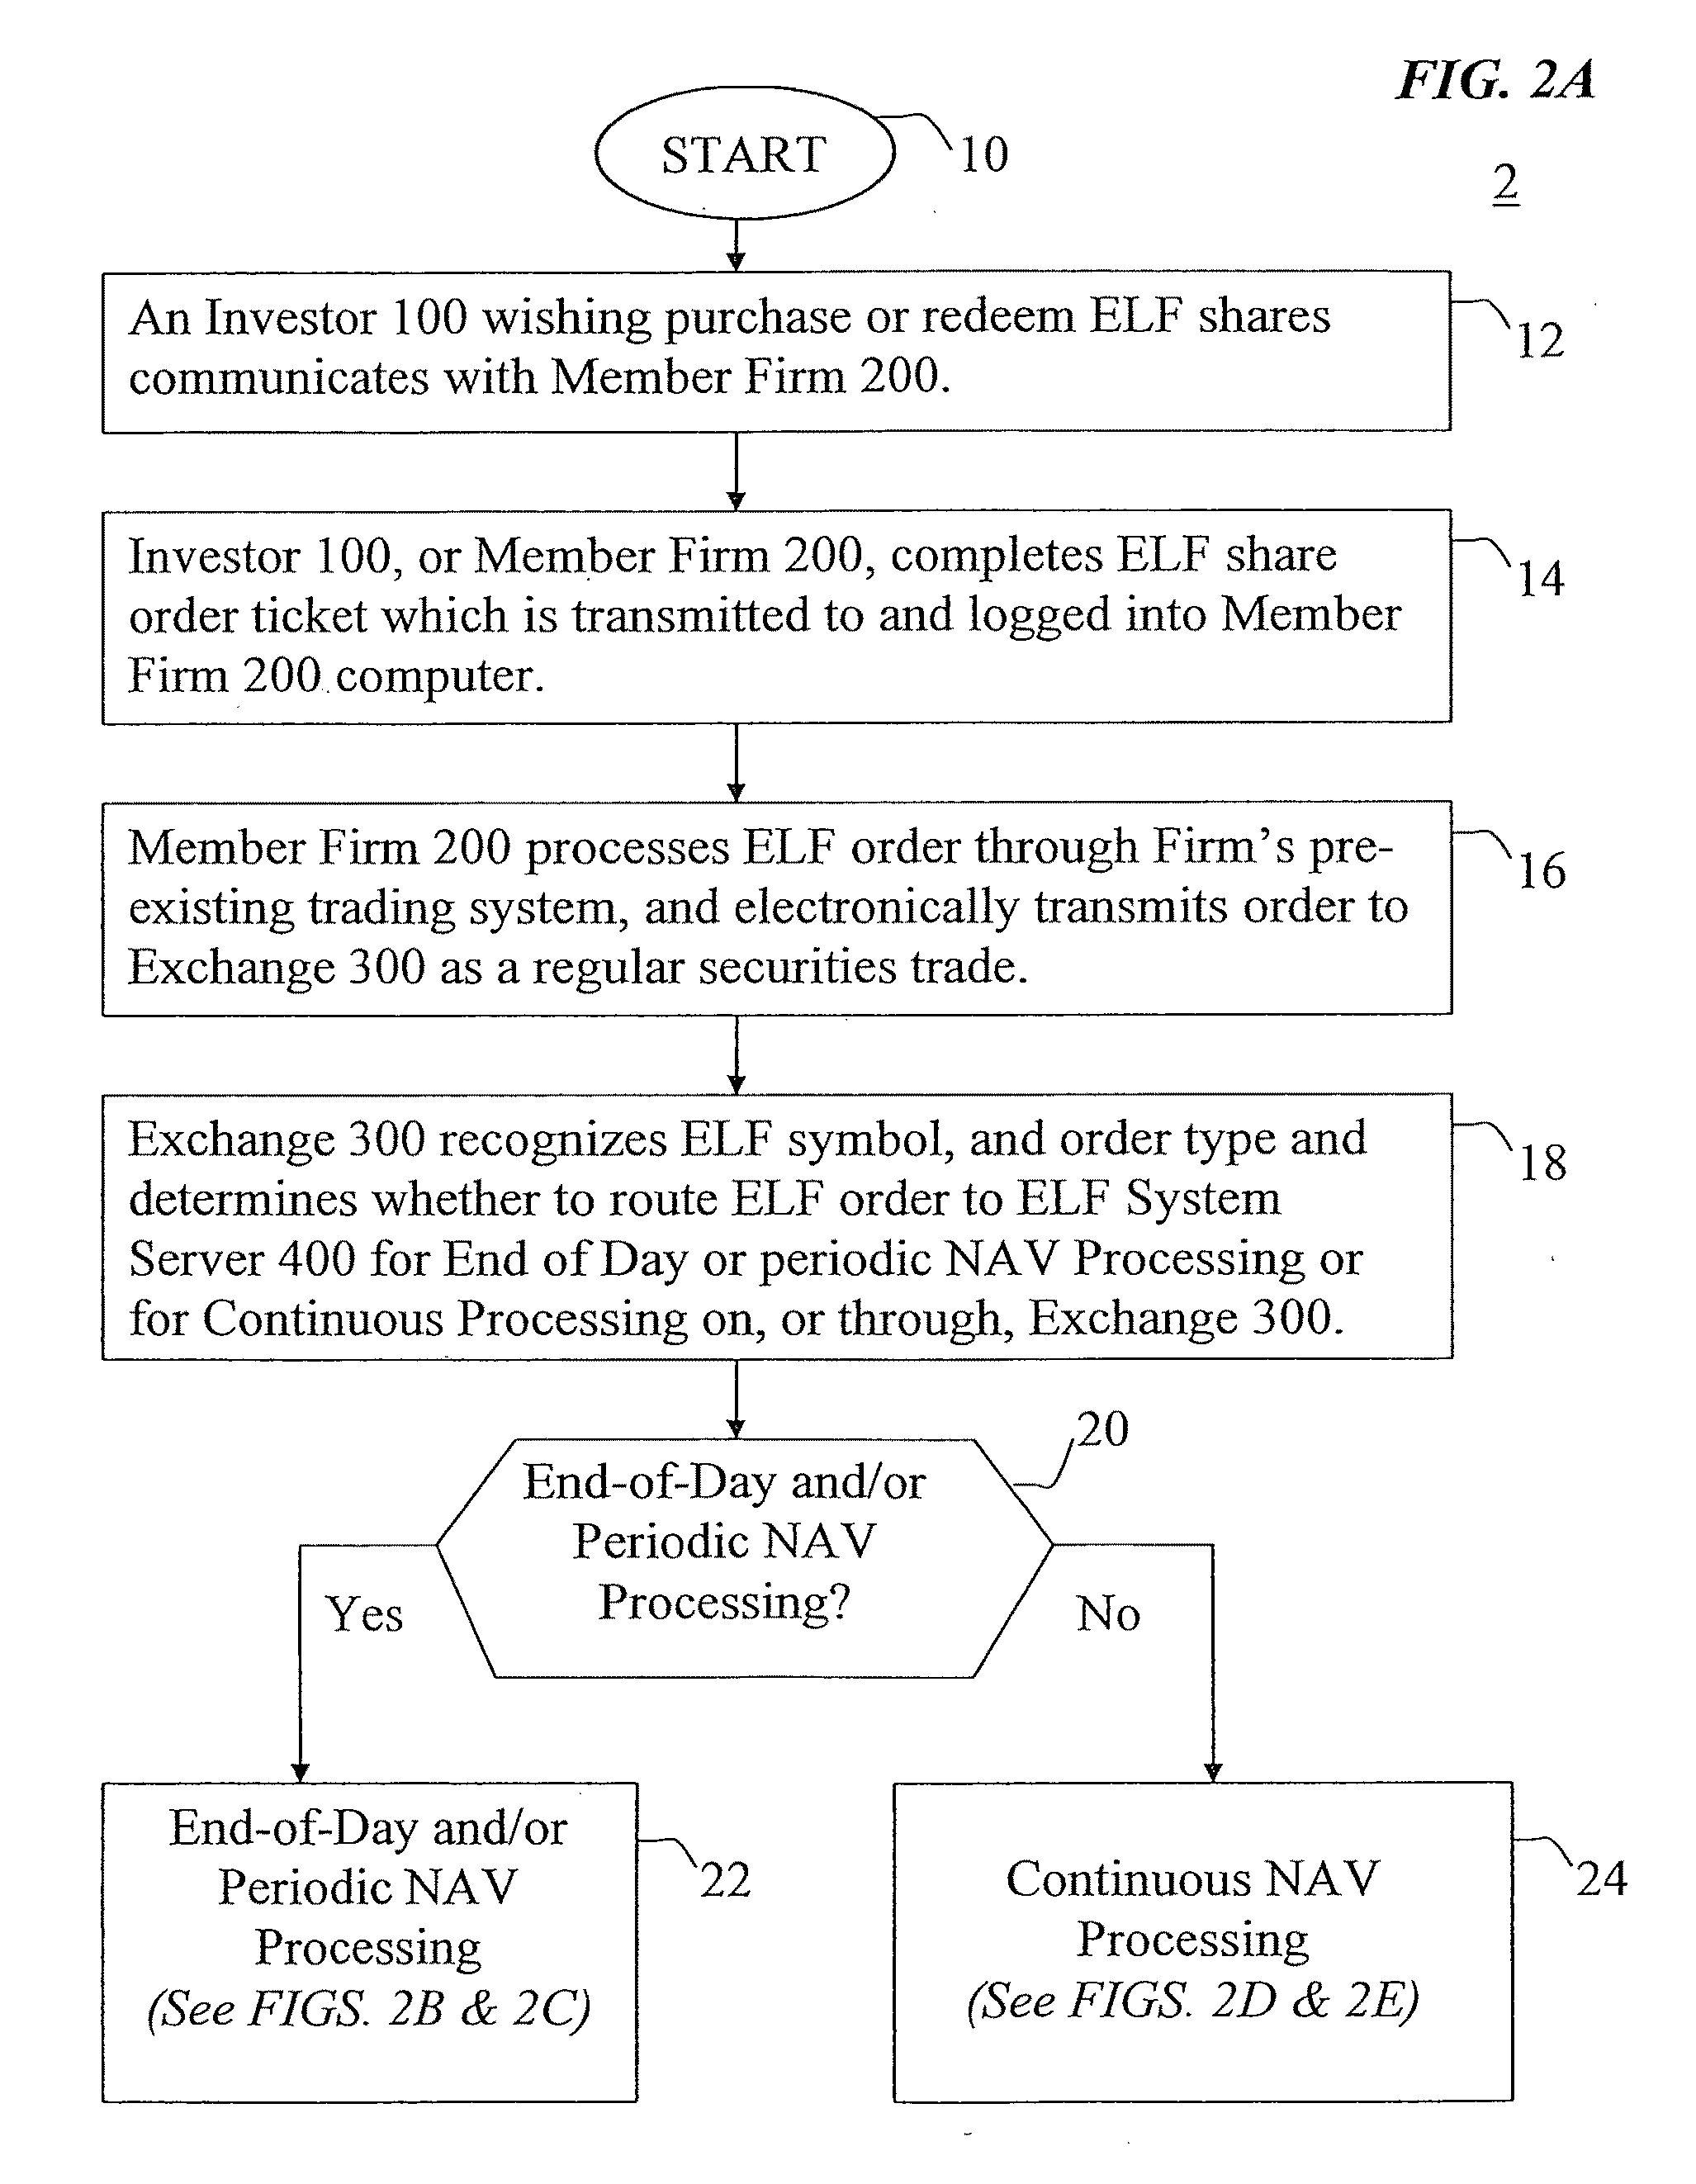 System and methods for processing open-end mutual fund purchase and redemption orders at centralized securities exchanges and other securities trading and processing platforms